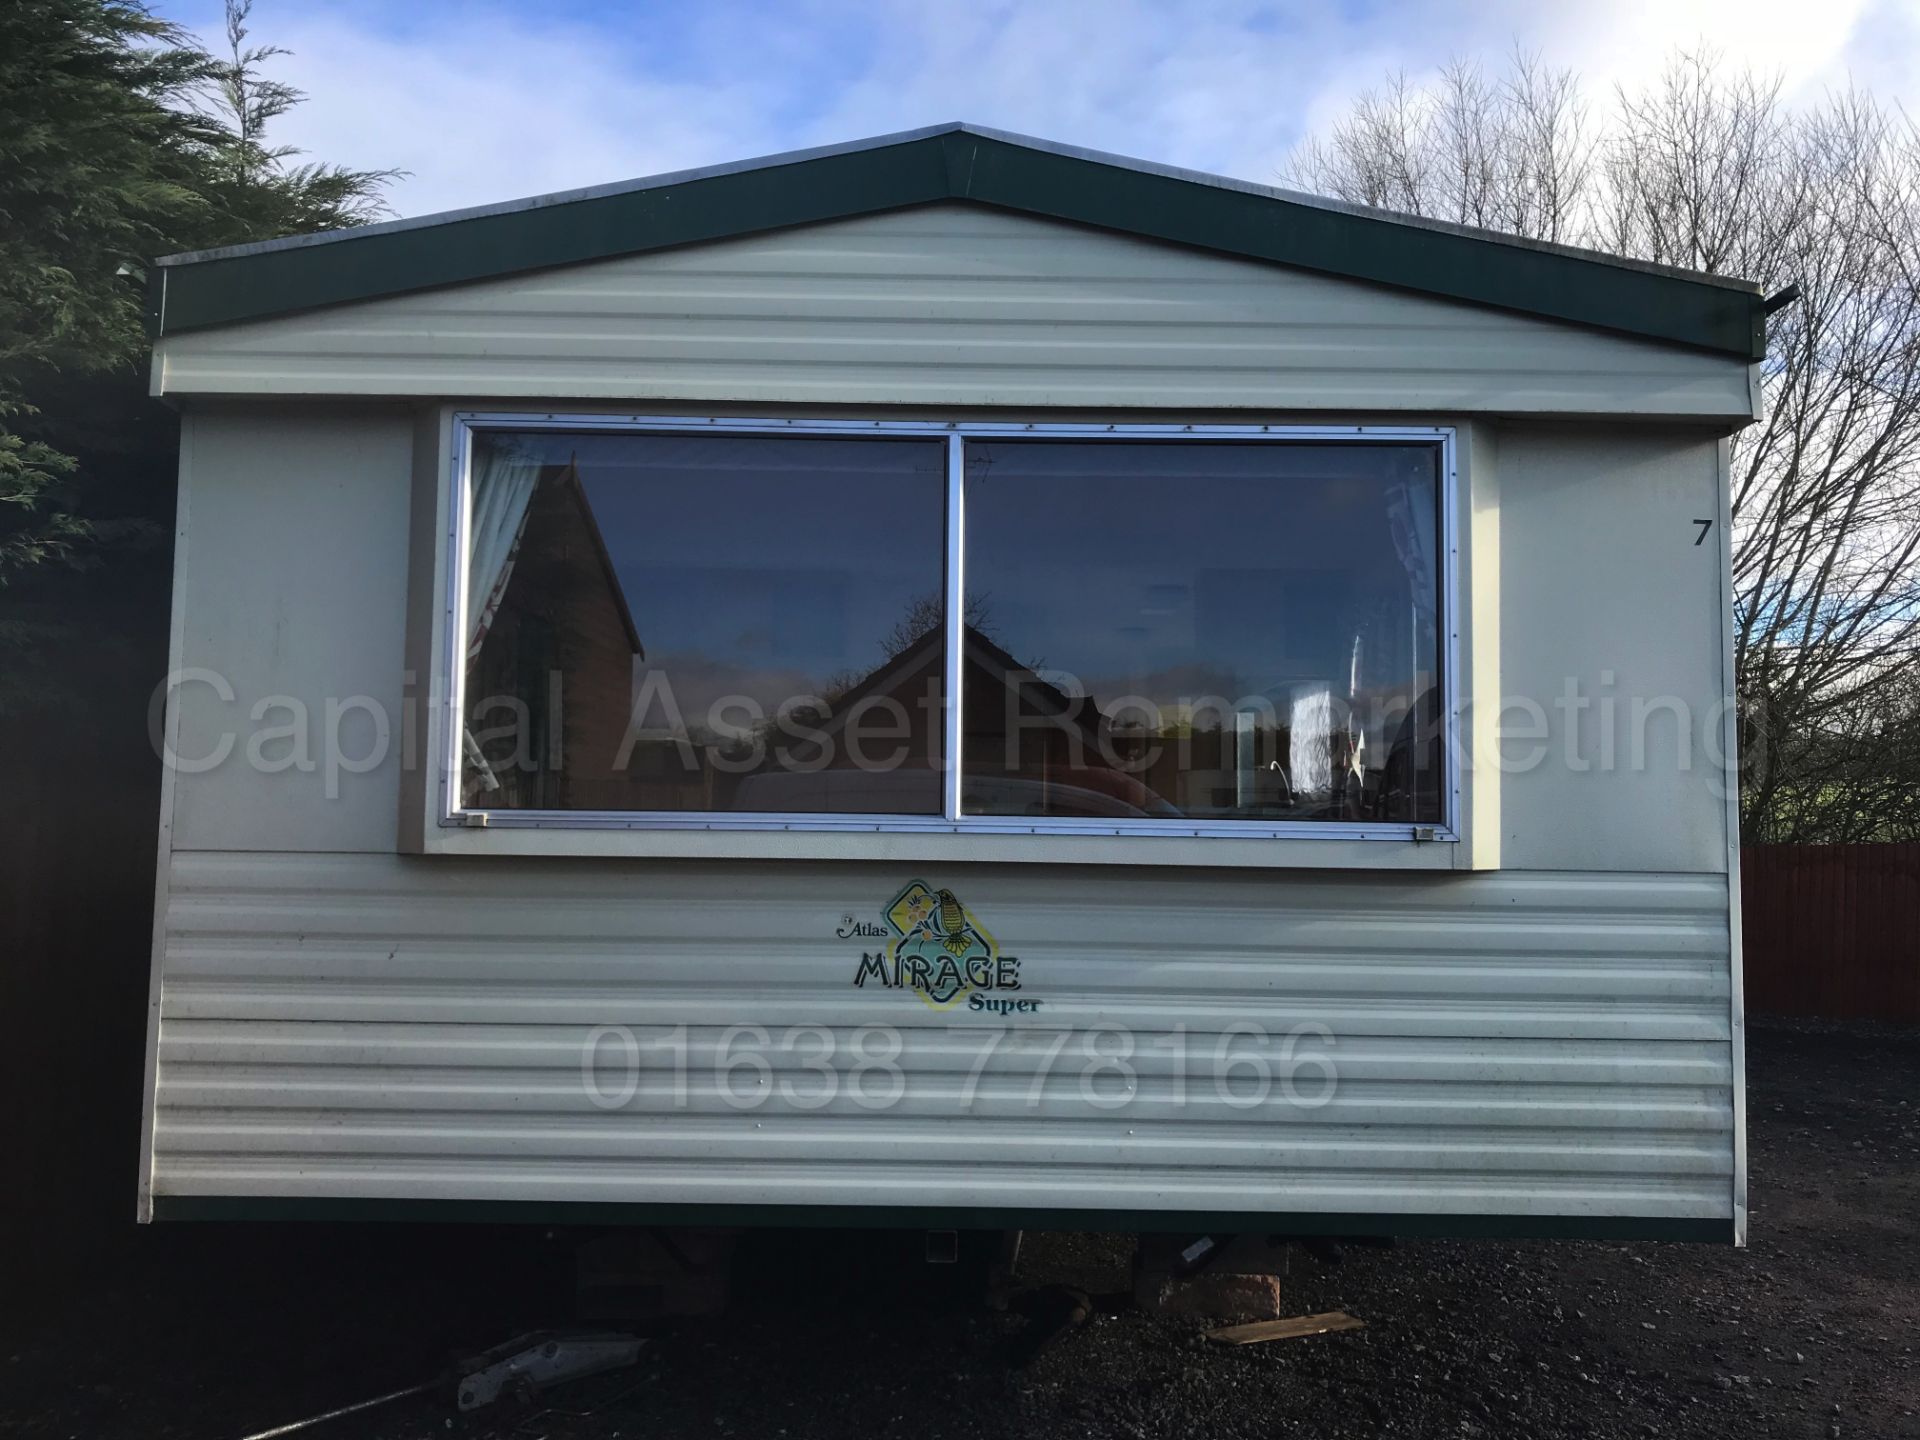 ATLAS MIRAGE 28X12 STATIC MOBILE HOME - 2 BEDROOM - GREAT SPEC - PITCHED ROOF - NO VAT TO PAY!!! - Image 4 of 24